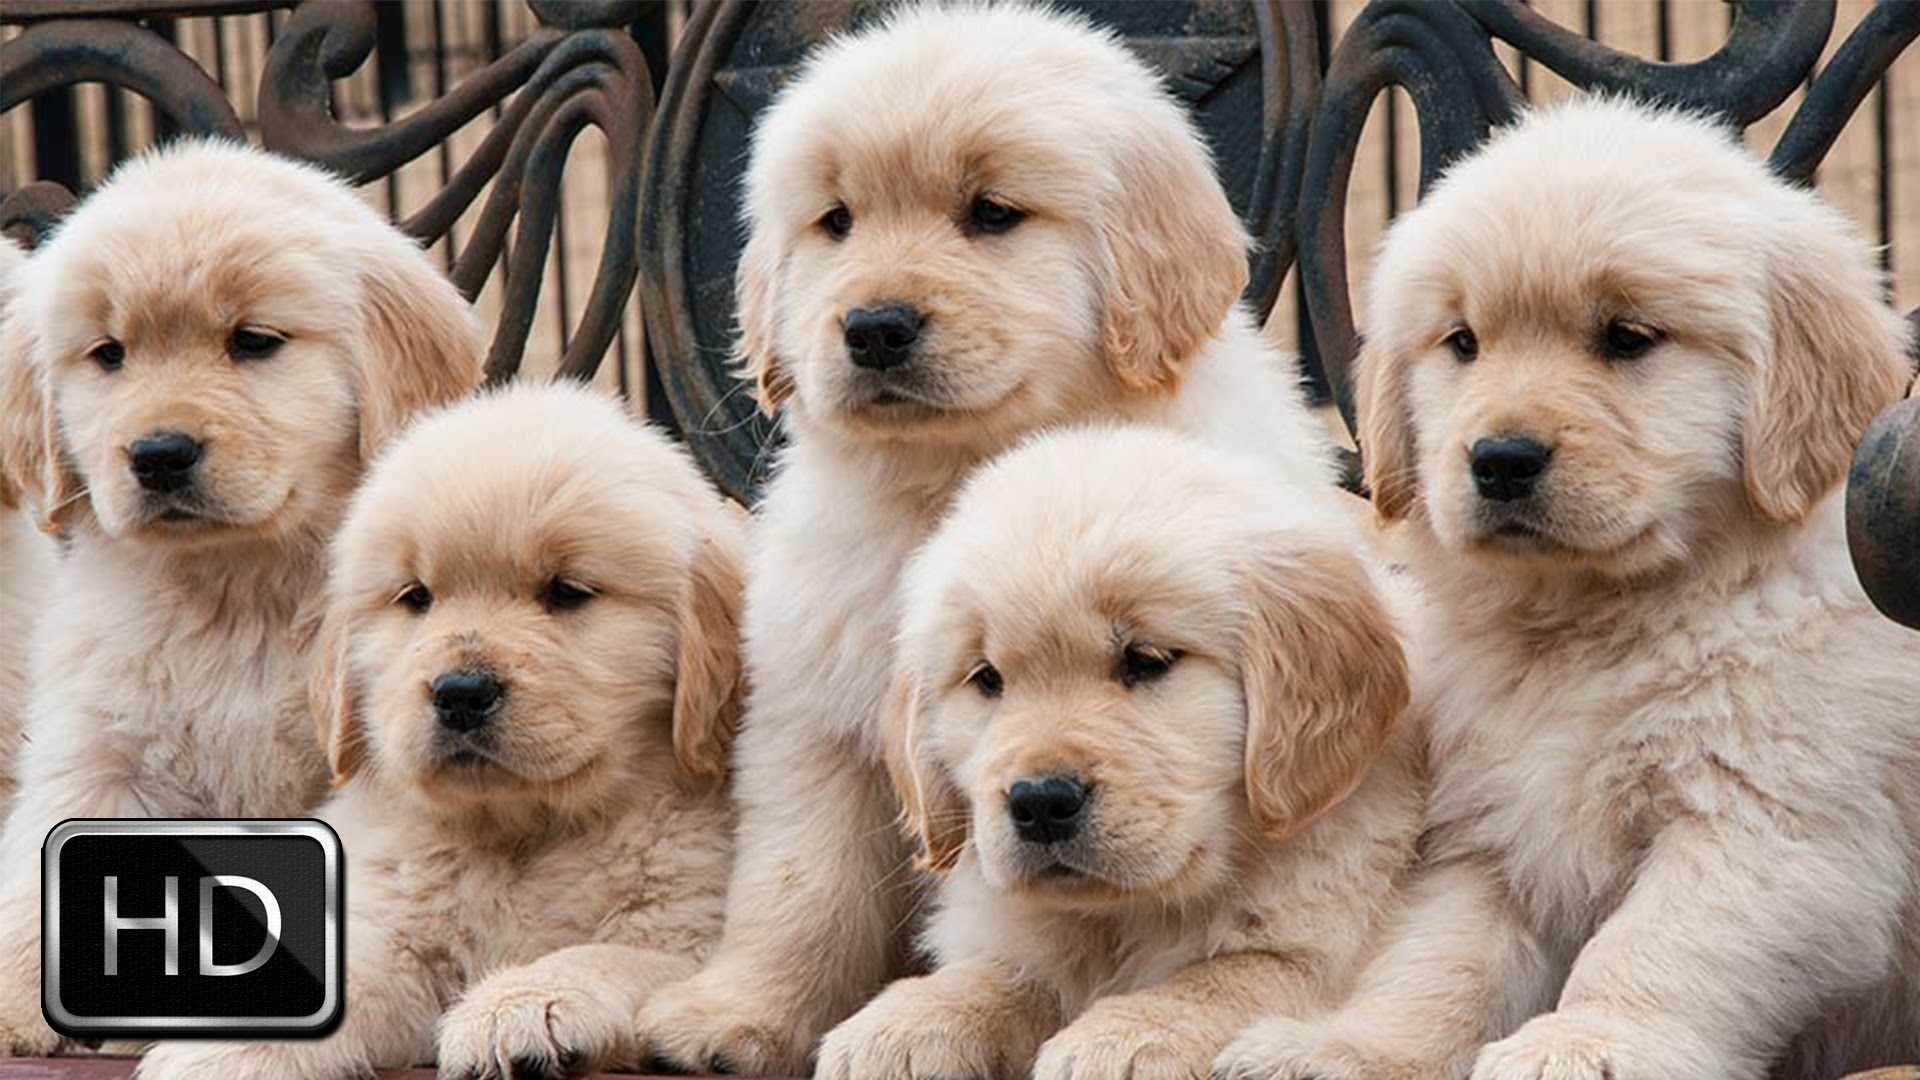 HD Cute Puppies Backgrounds 1920x1080